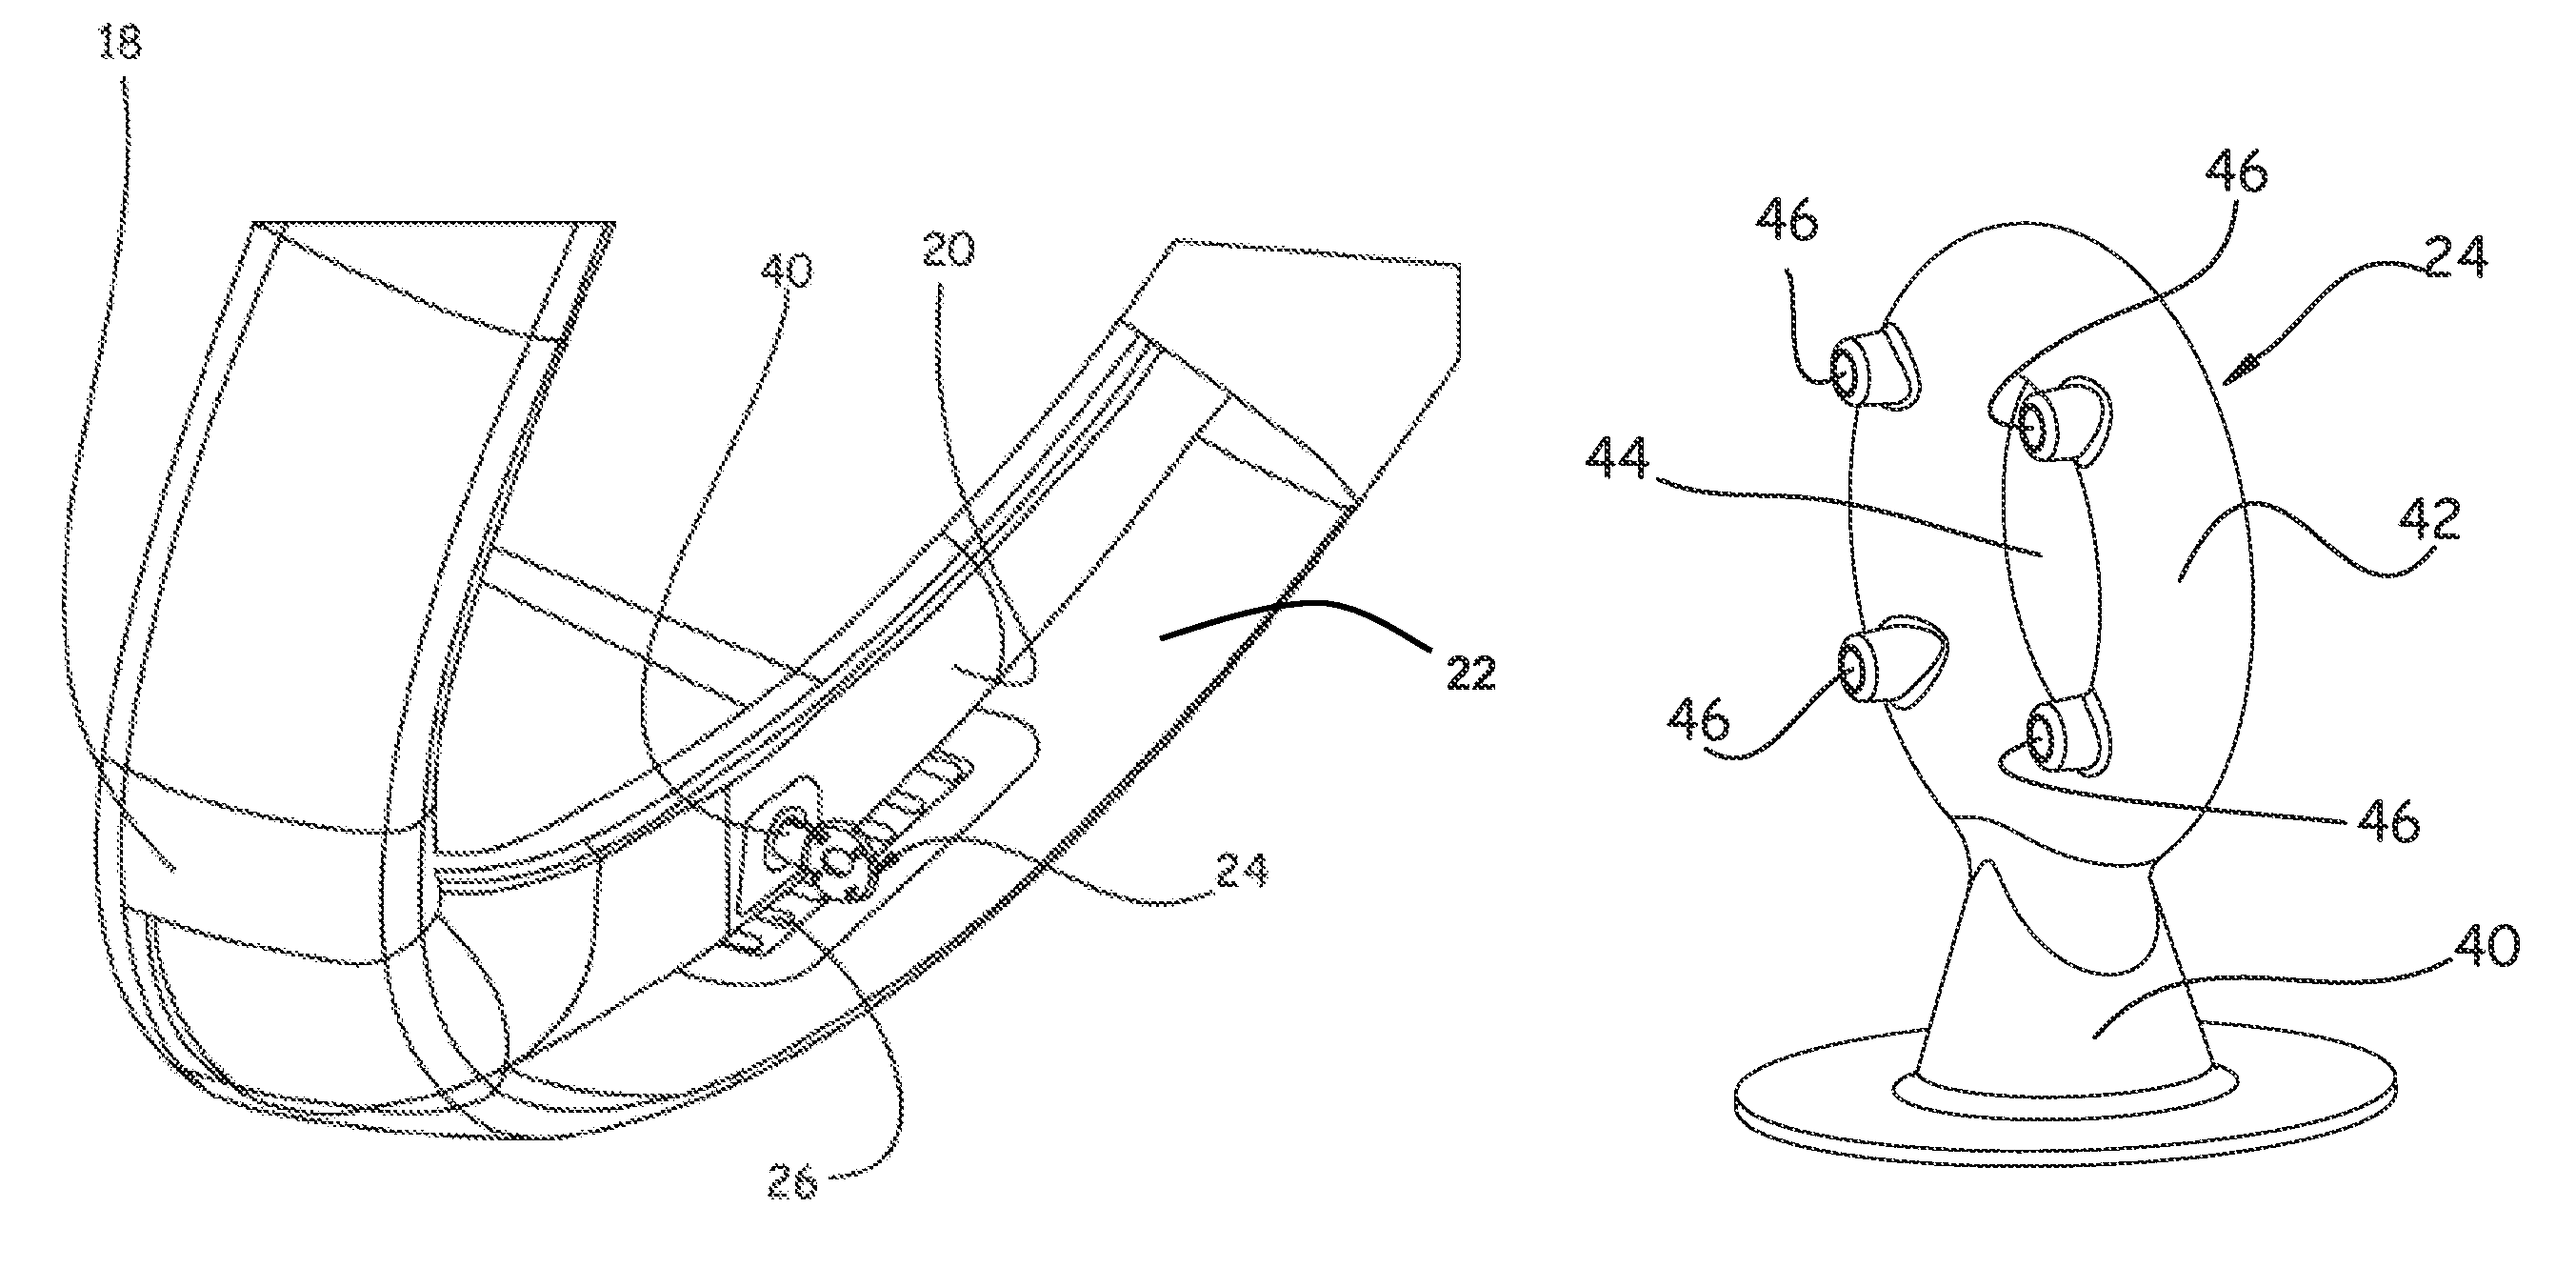 Aircraft nacelle air intake incorporating optimized ice-treatment hot air injection means